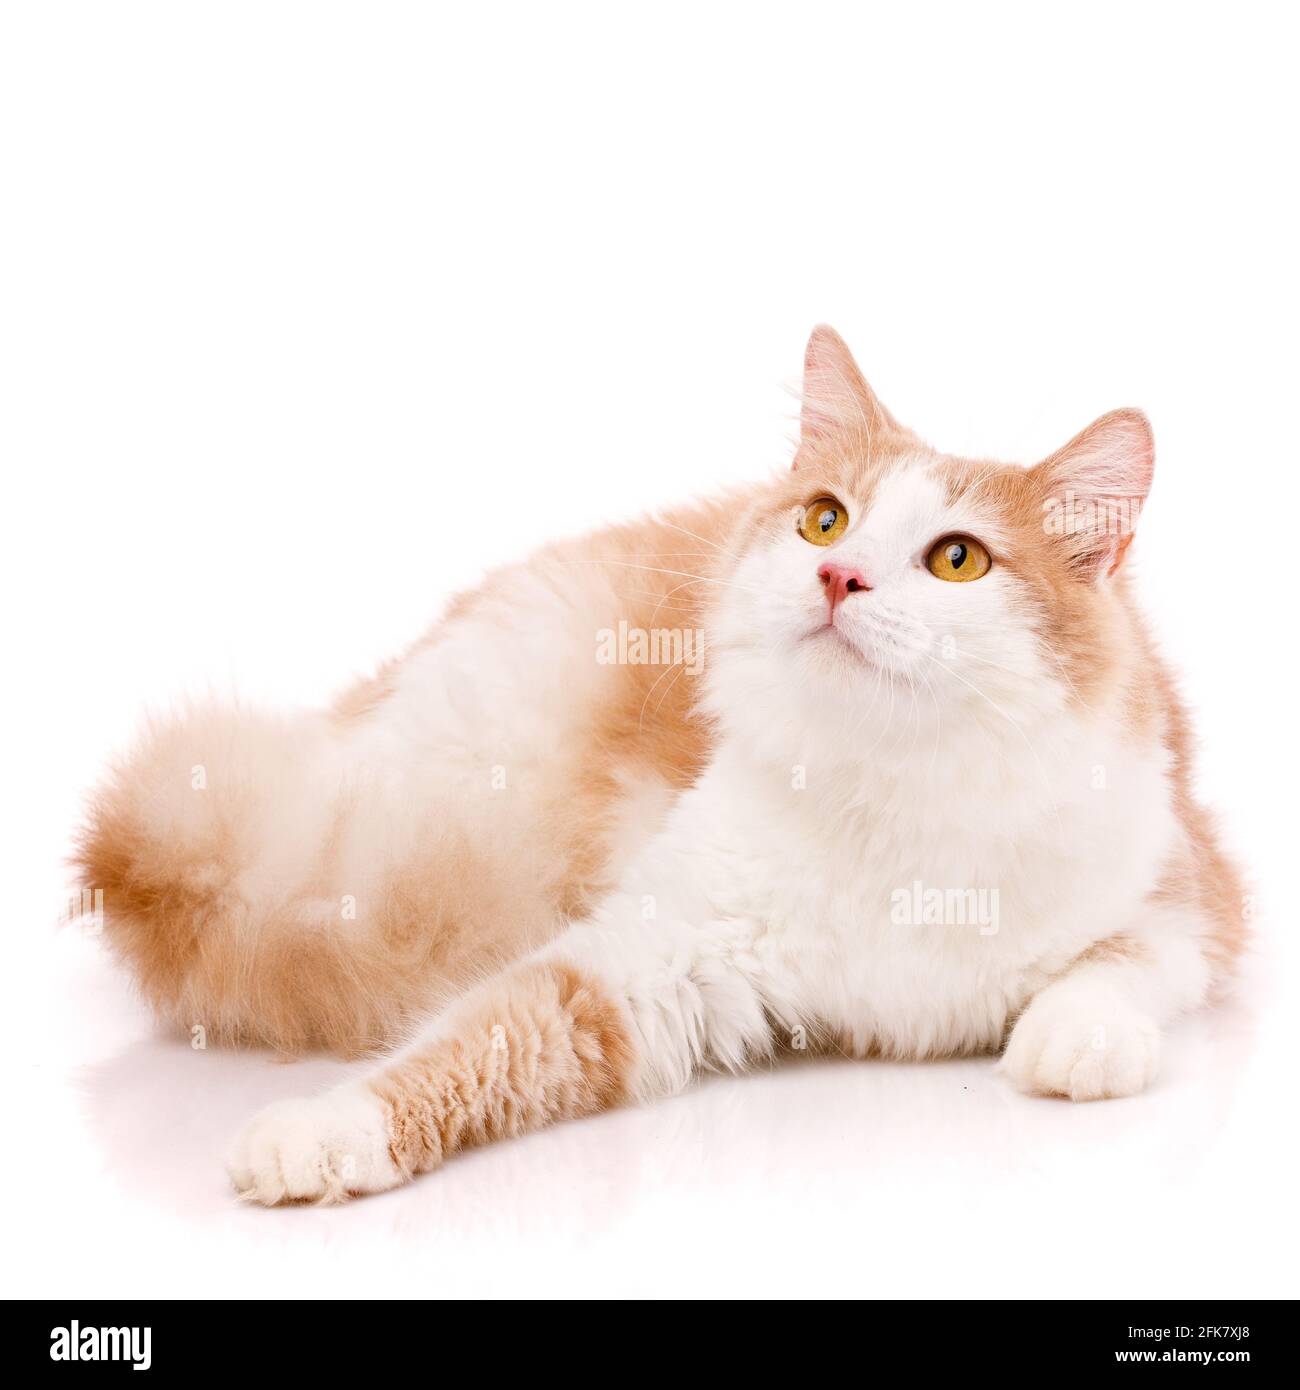 Satisfied domestic cat with light fur and yellow eyes lies on a white background with an outstretched paw and looks up. Cat for food advertising. Play Stock Photo